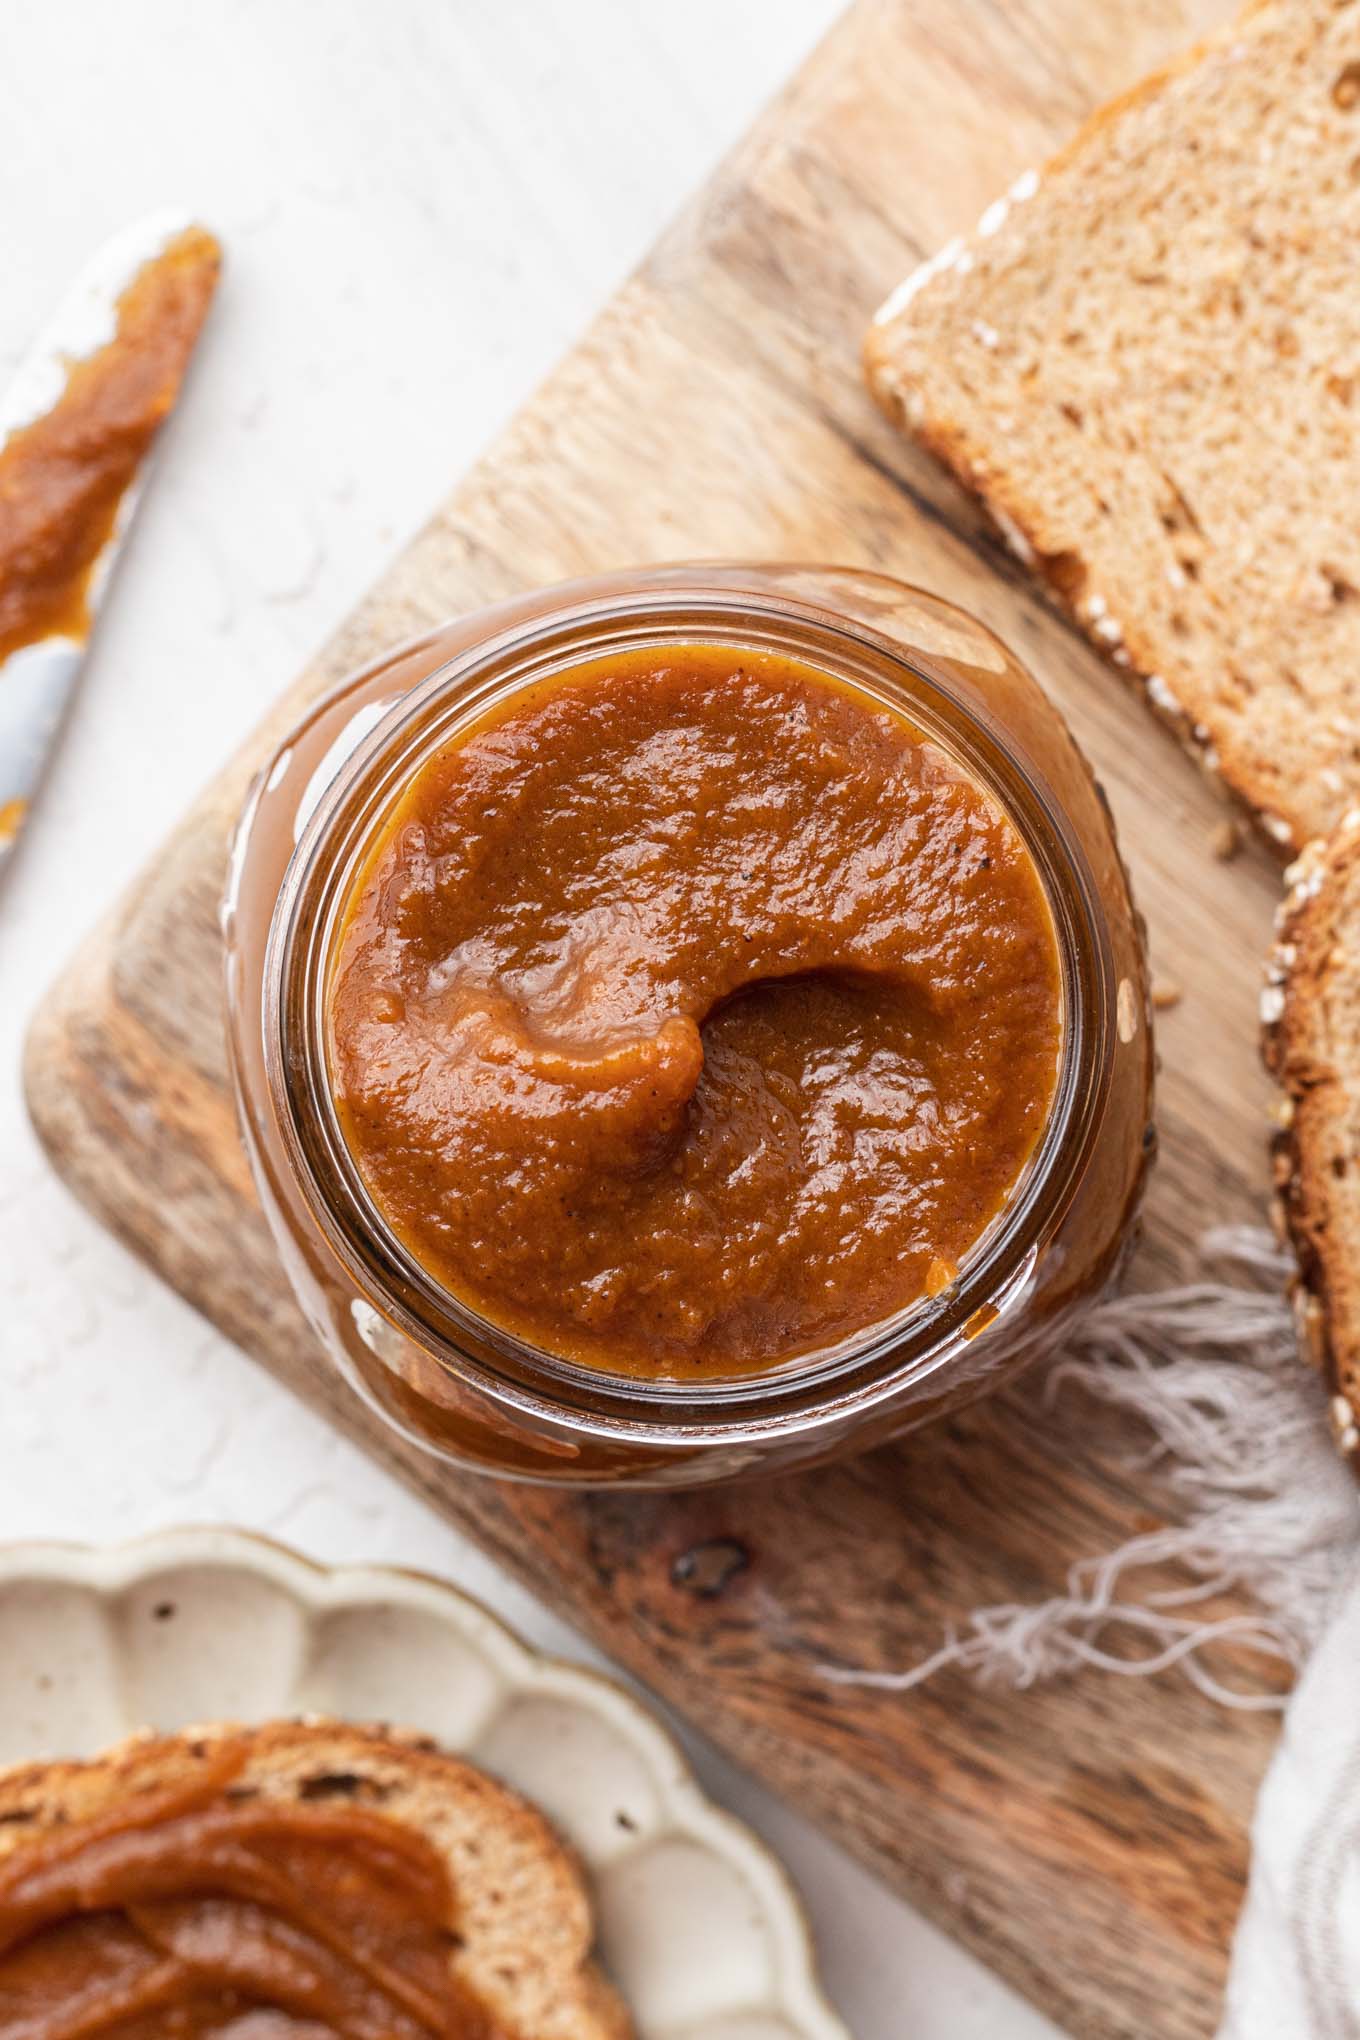 An overhead view of a jar of pumpkin butter on a wood board with bread slices. 